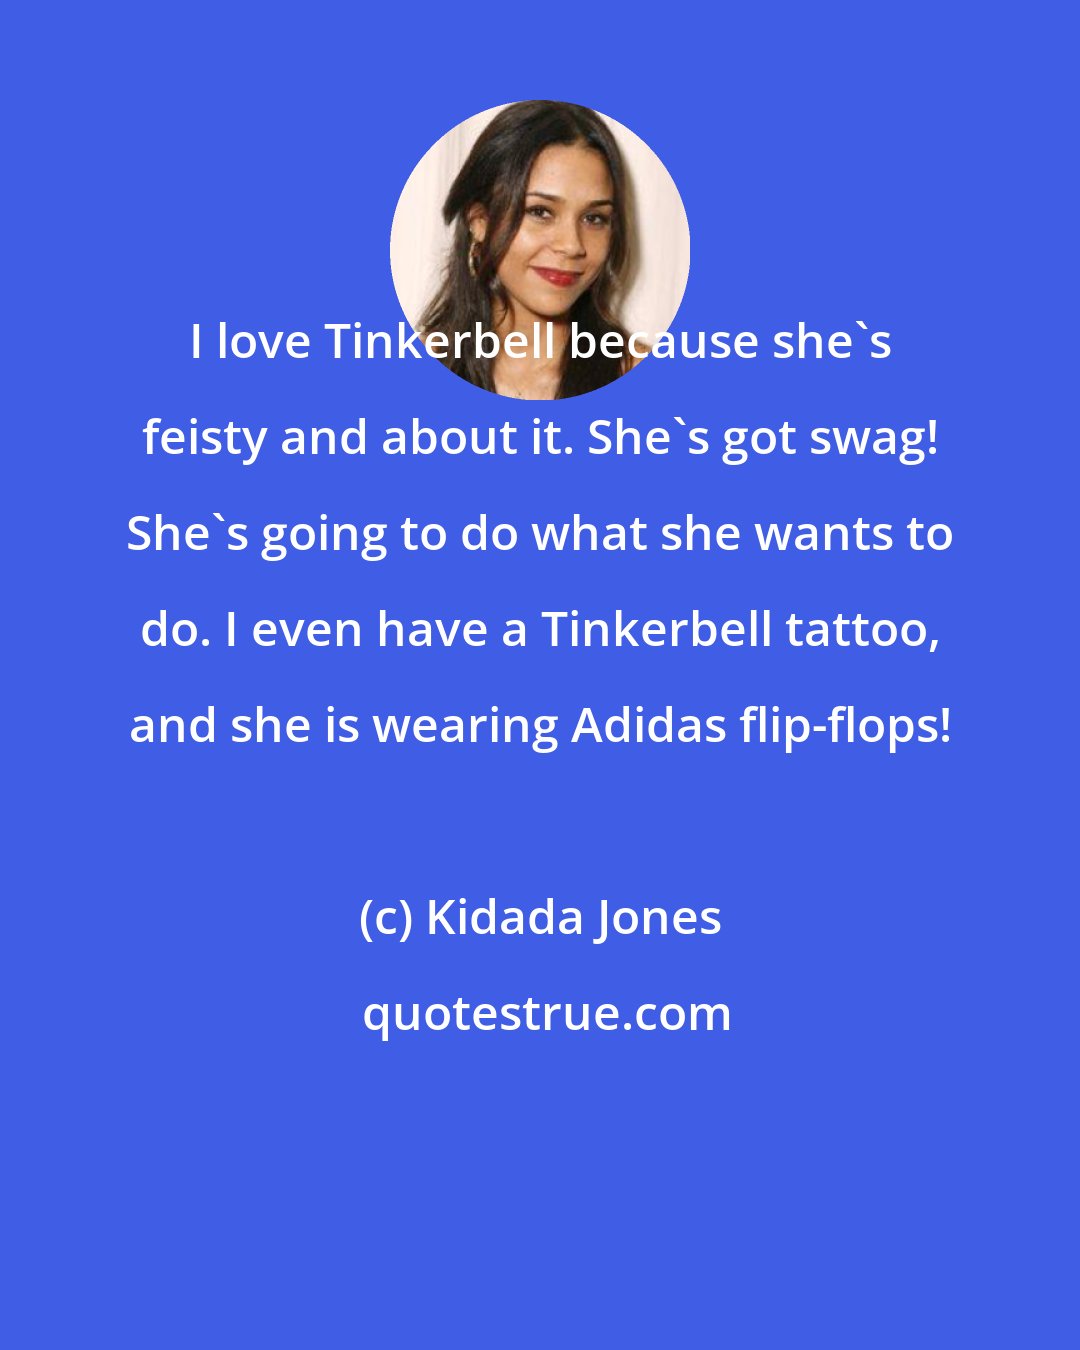 Kidada Jones: I love Tinkerbell because she's feisty and about it. She's got swag! She's going to do what she wants to do. I even have a Tinkerbell tattoo, and she is wearing Adidas flip-flops!